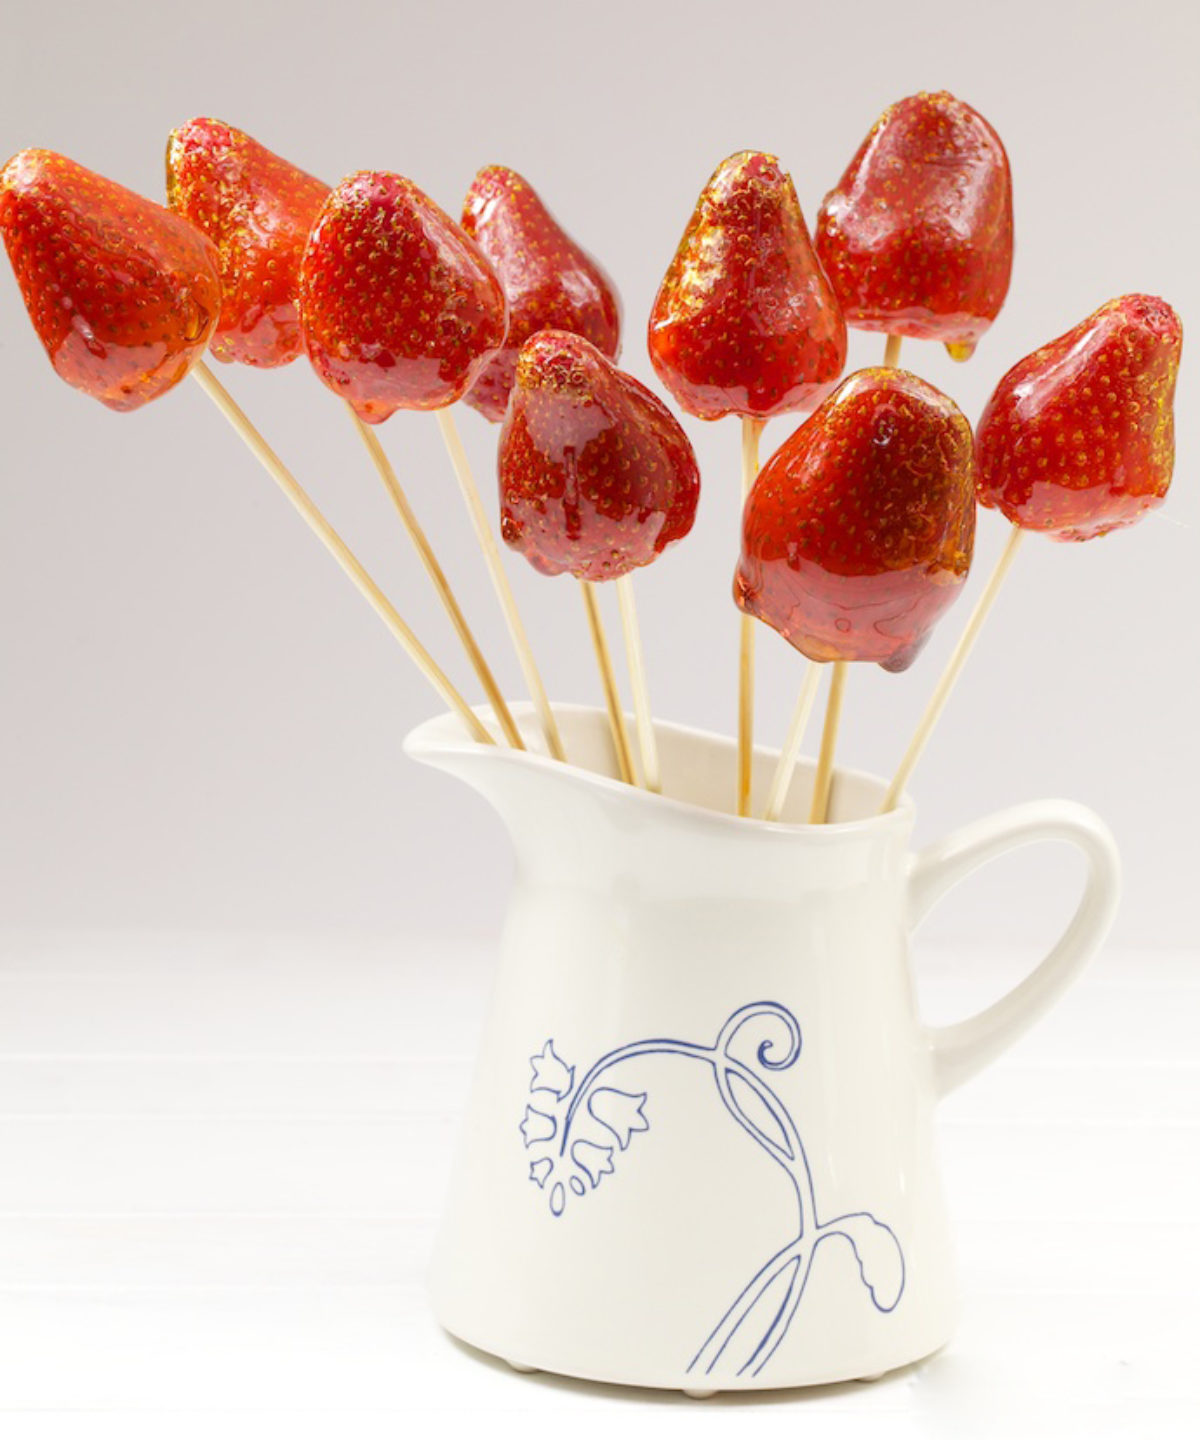 Bing Tanghulu – Chinese Candied Fruit On A Stick